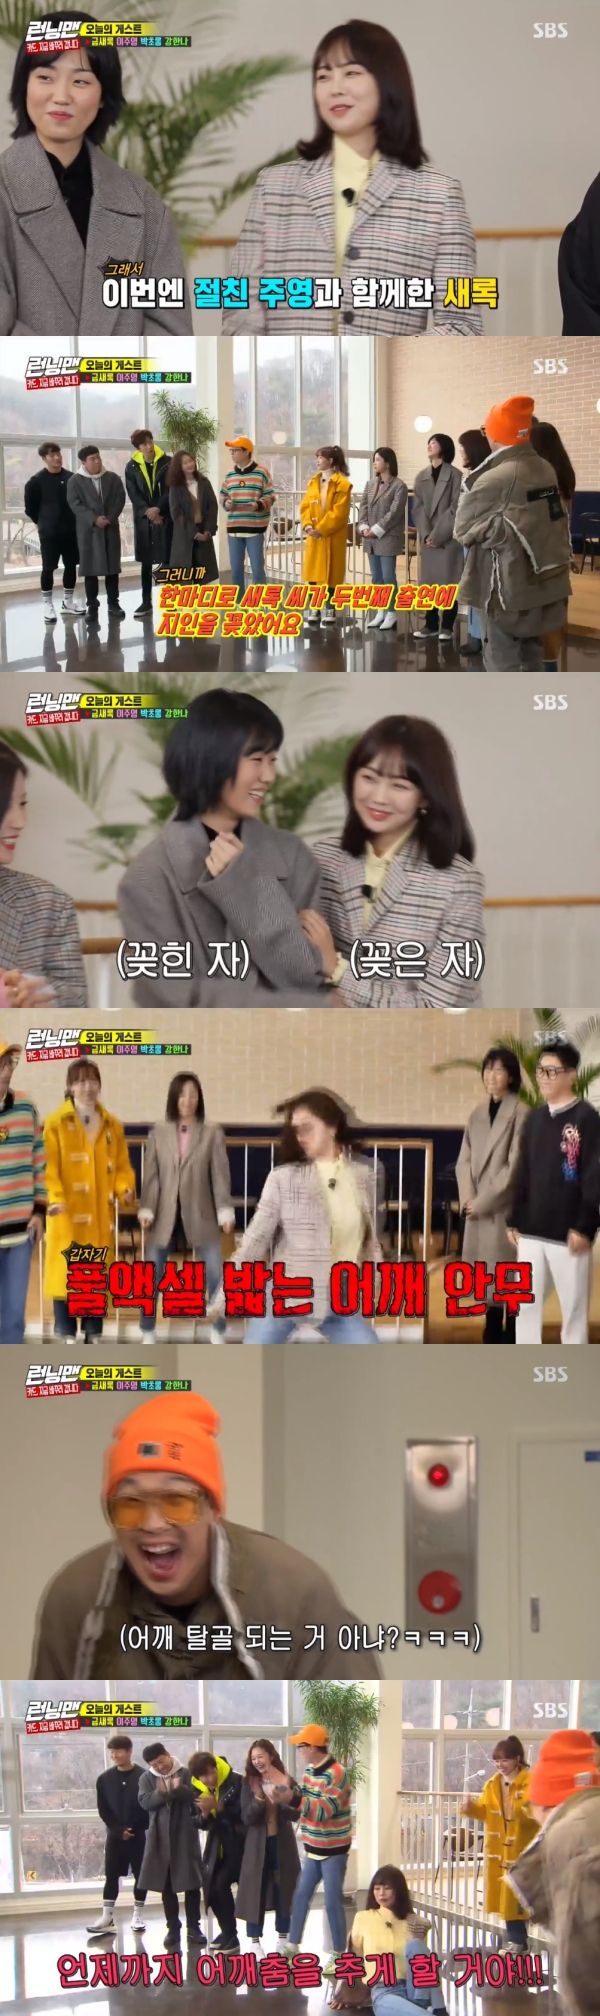 Keum Sae-rok presented shoulder danceOn SBS Running Man broadcasted on the 19th, Keum Sae-rok showed a dance performance with Lee Ju-young as a guest.On the day of the broadcast, Keum Sae-rok introduced Lee Ju-young as Believer.I was nervous and nervous, he said. I told him I wanted to come out with my close Sister this time.Yoo Jae-Suk said, In a word, Mr. Sarok has put his acquaintance in his second appearance, and the members added, It is influential.Ji Suk-jin said, I barely survive.Keum Sae-rok said, I came to Moon Seok-hyun, who is like a hot-blooded priest , for a day lesson. It is a dance that is only performed with my shoulders.Ive done well before, its an Actor and a dance to my Dancing Nine brother, Yoo Jae-Suk added.On the dance of Keum Sae-rok, the members laughed, saying, It is good expression, I made it, I use a lot of shoulders.